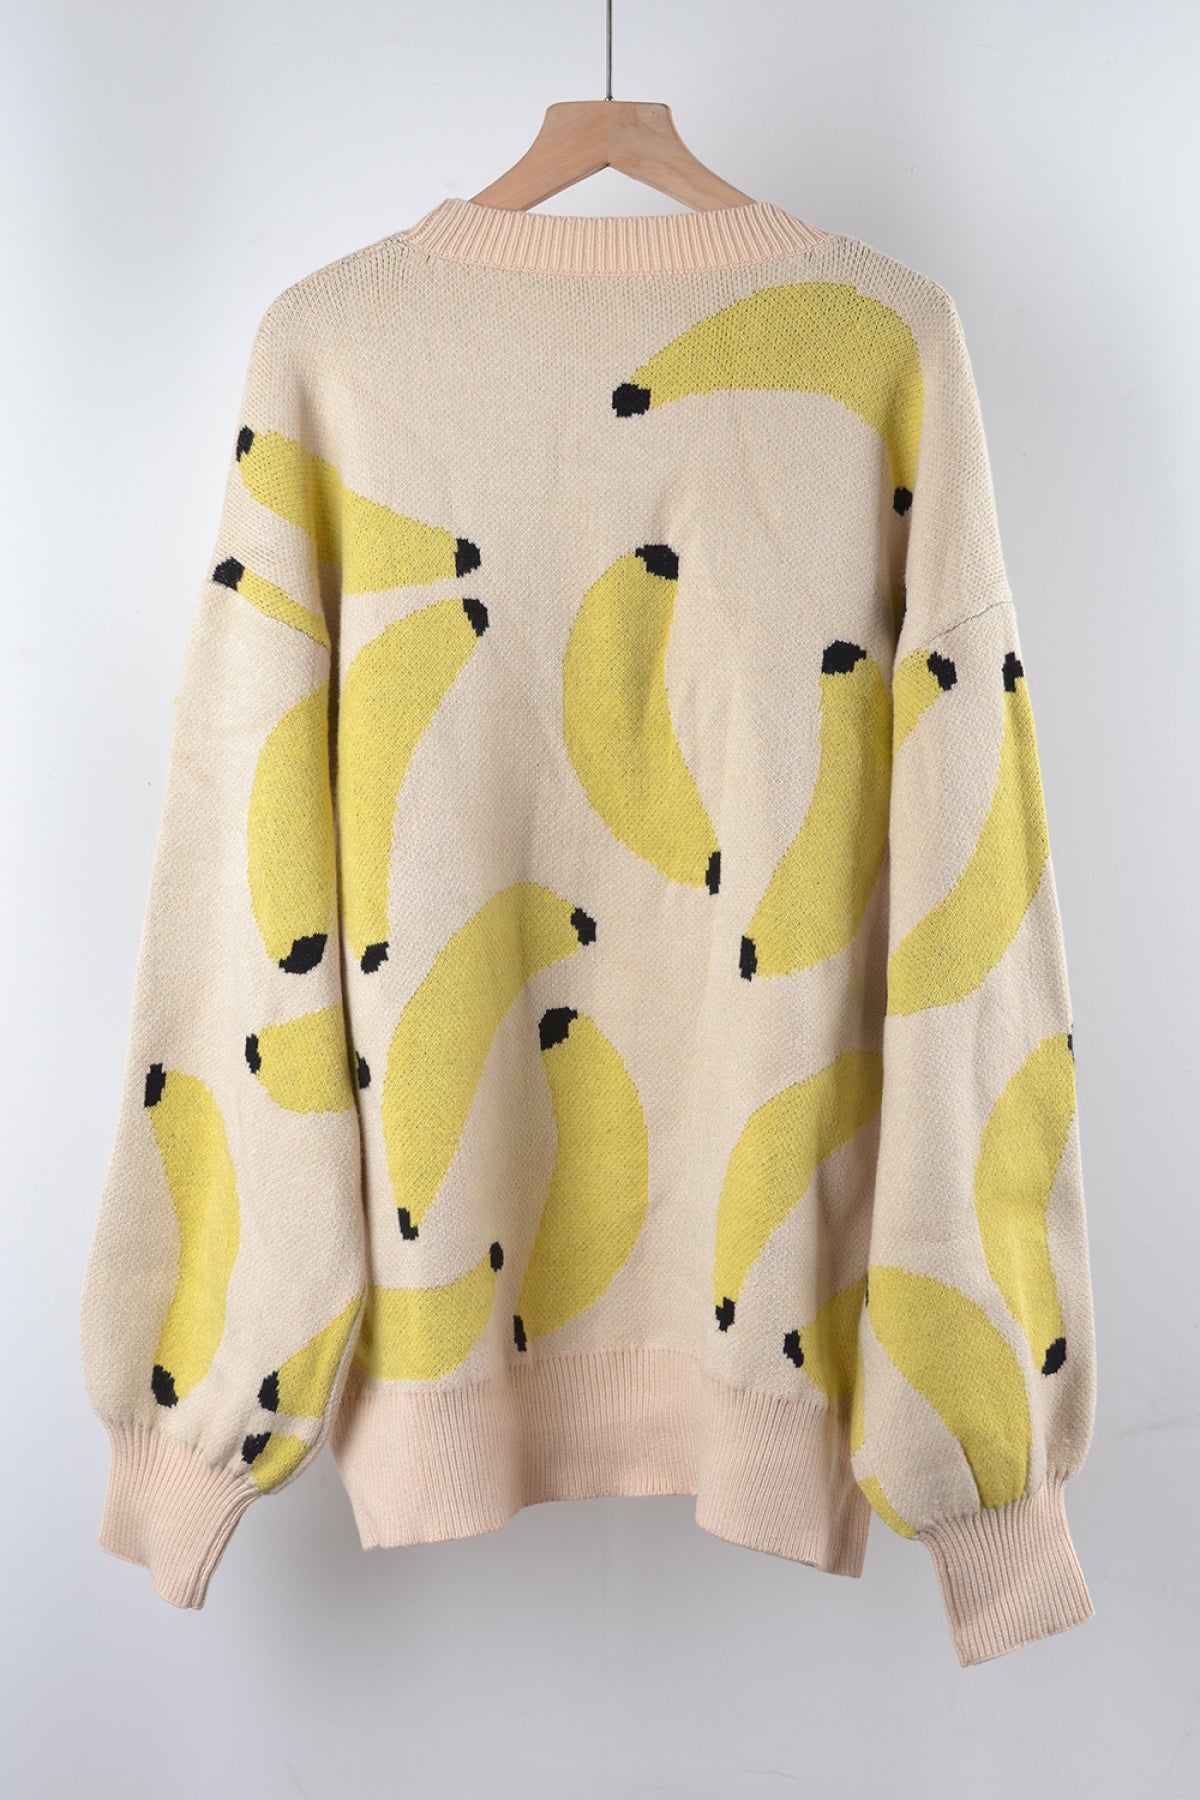 Banana Print Pullover Round Neck Long Sleeve Sweater